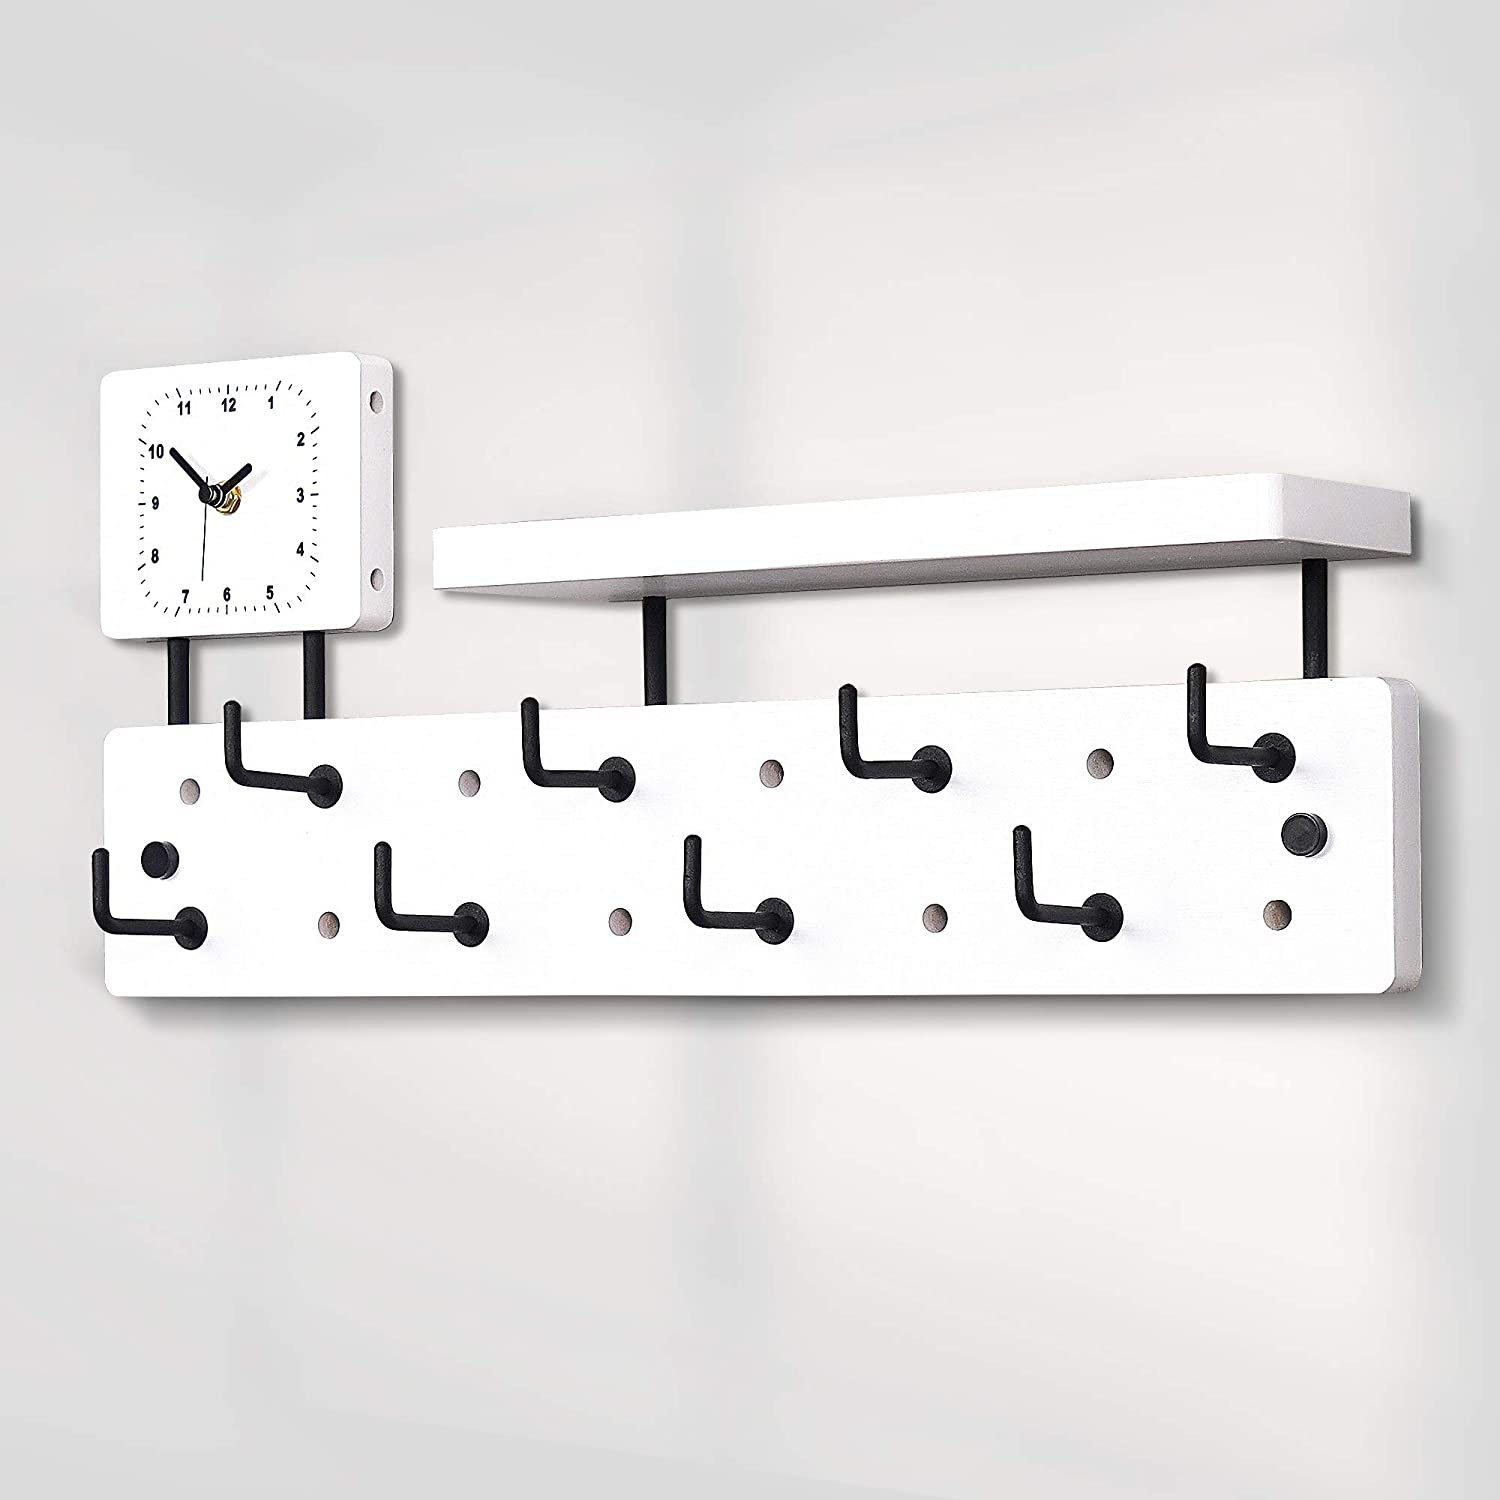 PHOTA Entryway Coat Hooks with Shelf and Clock, Wall-Mounted Hanging Rack Entryway Decor